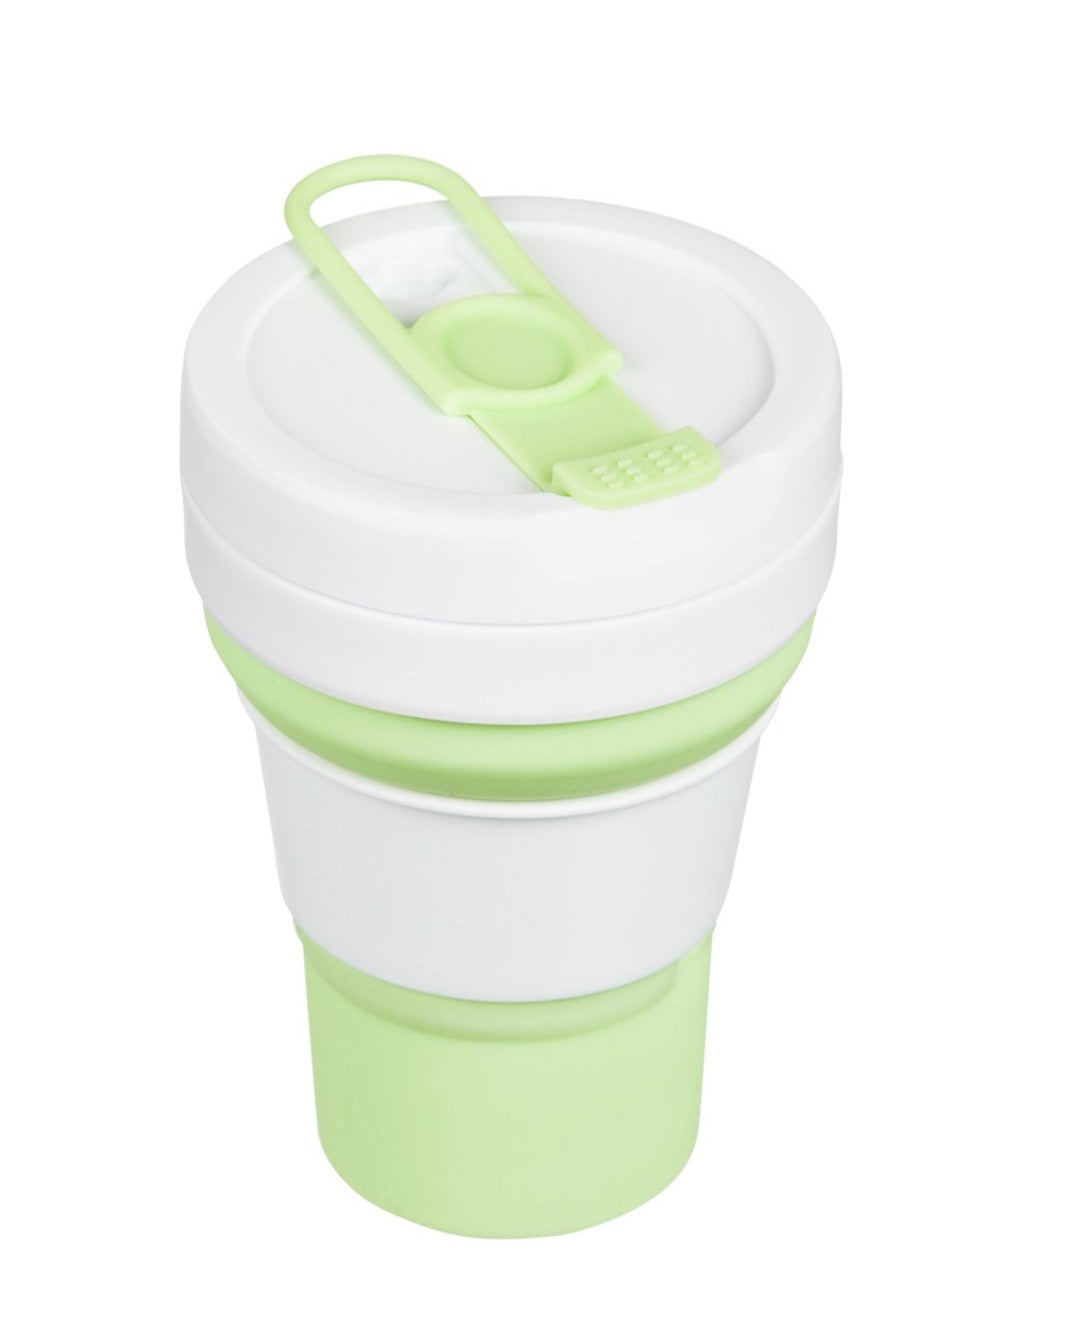 Collapsible 16 OZ Silicone Beverage Cups, 3 Assorted Colors